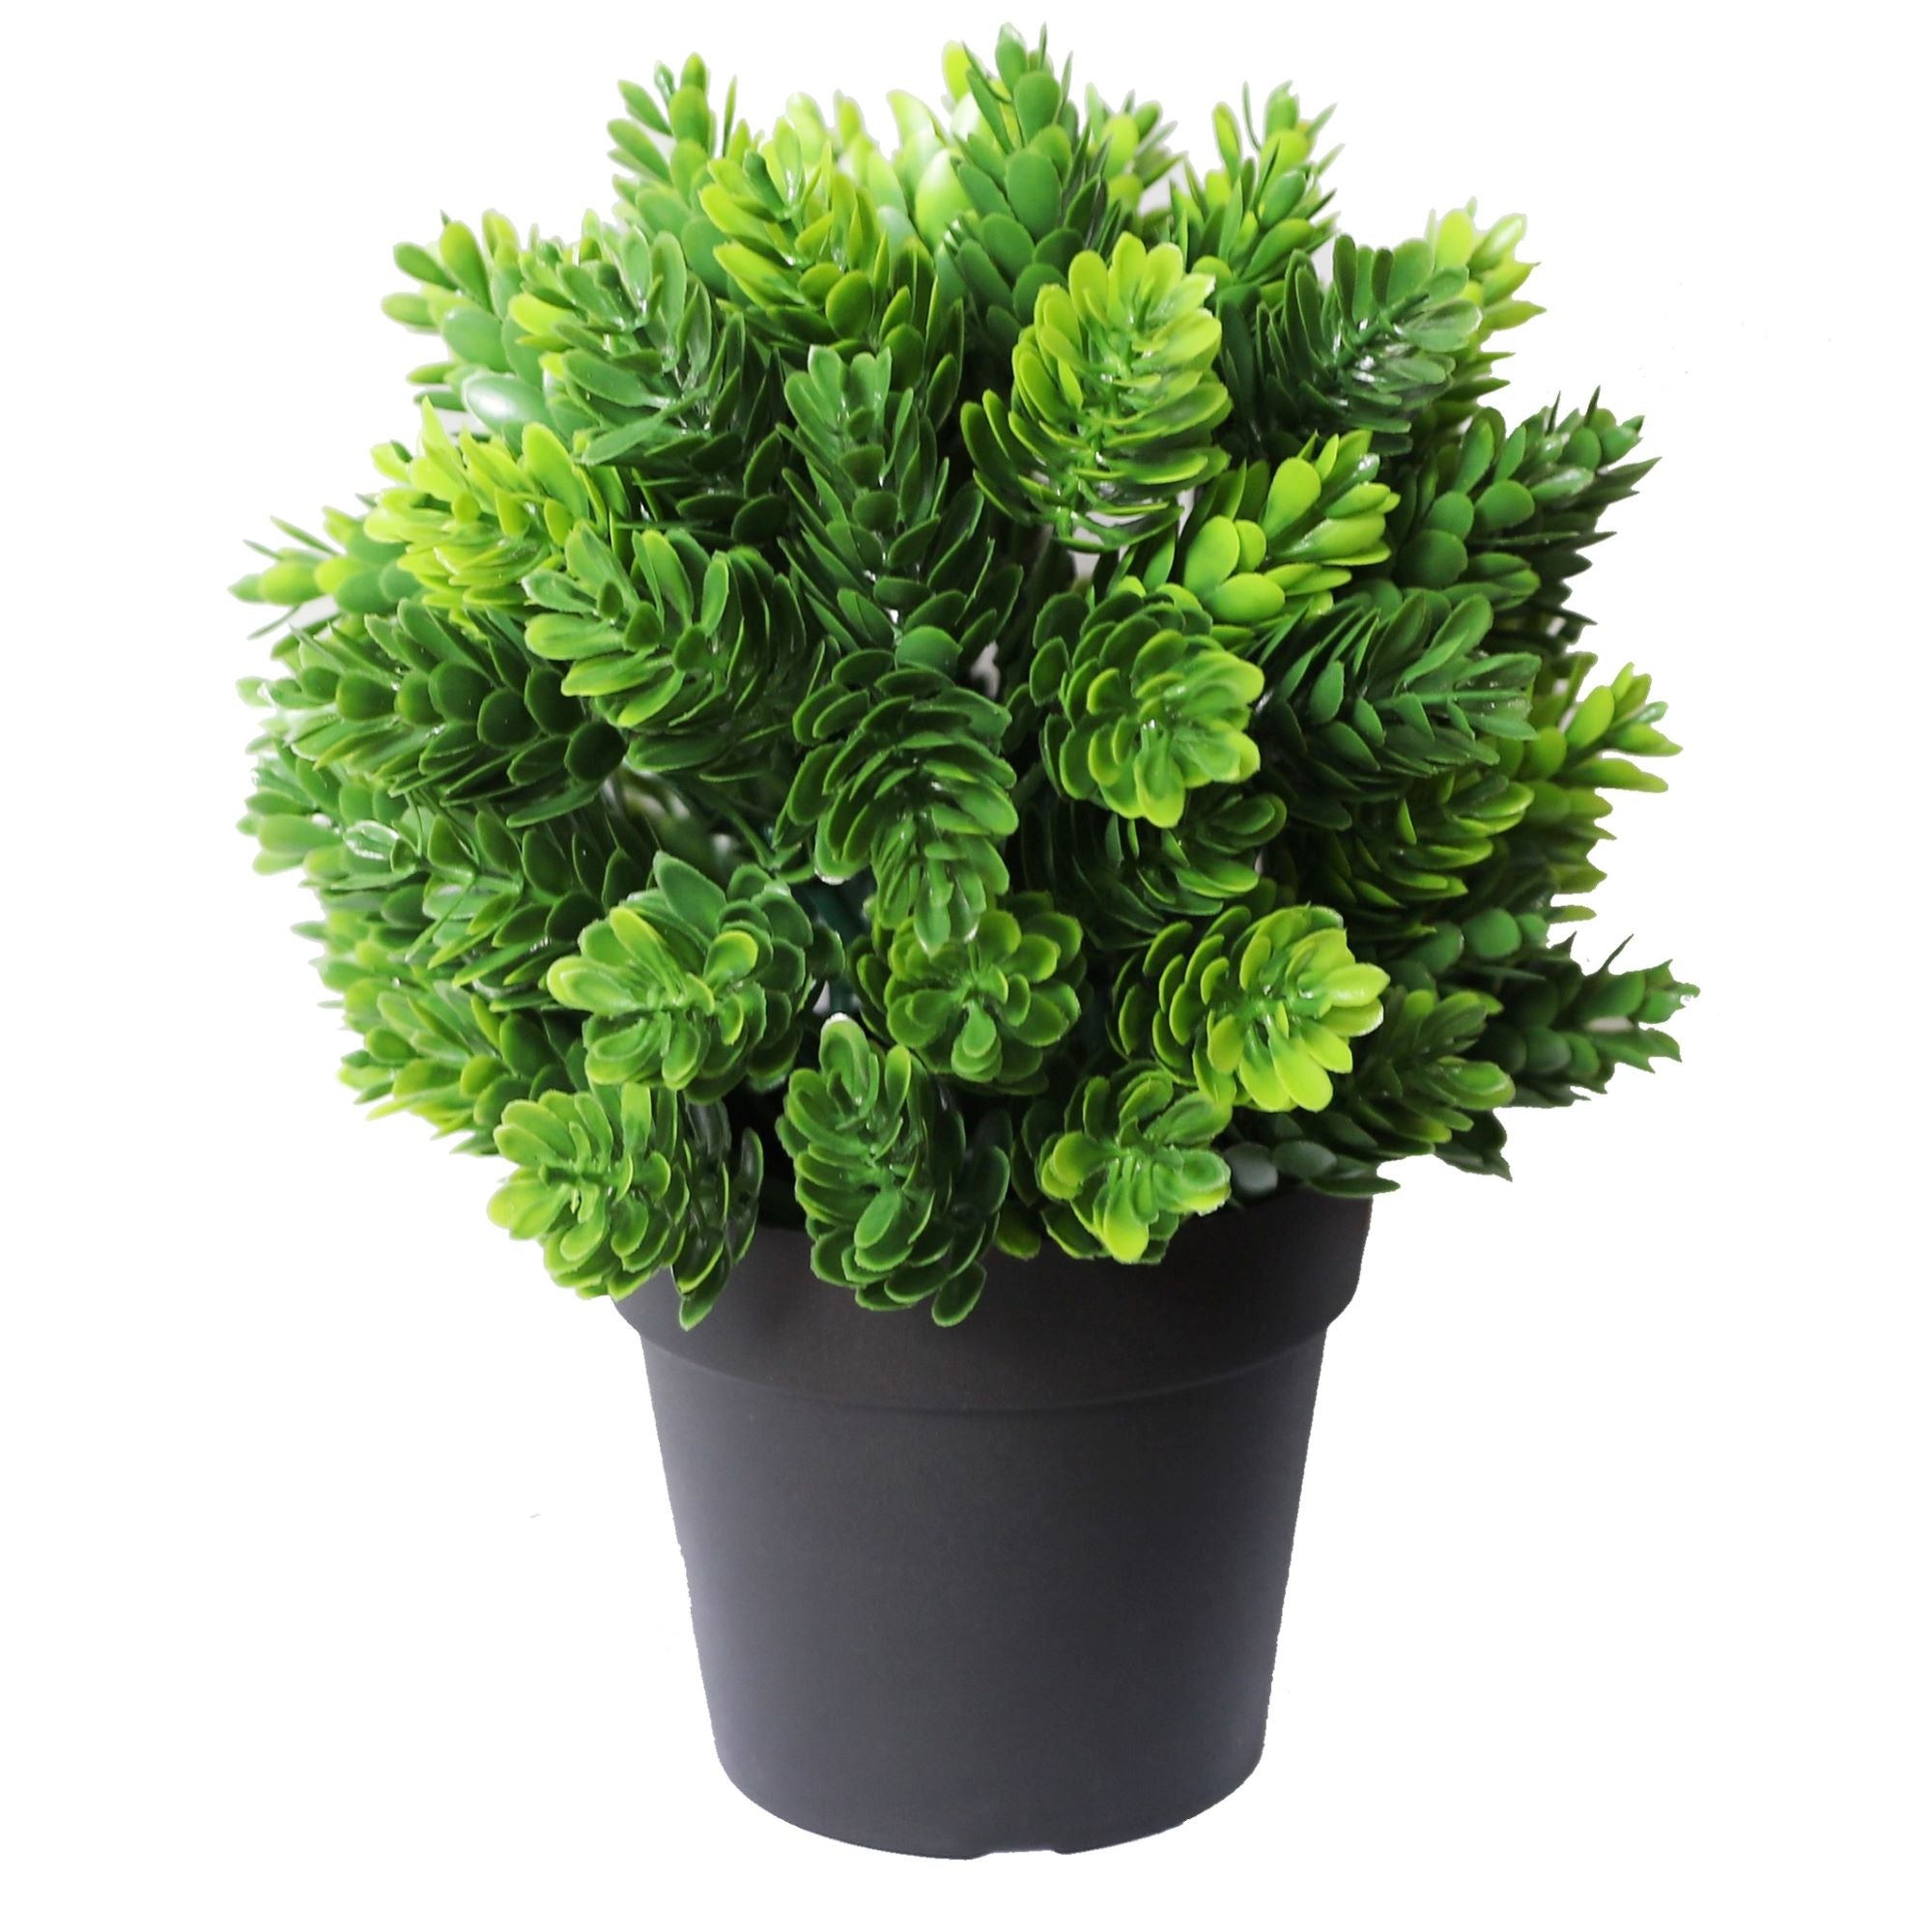 small-potted-artificial-flowering-hop-plant-uv-resistant-20cm-764141.jpg